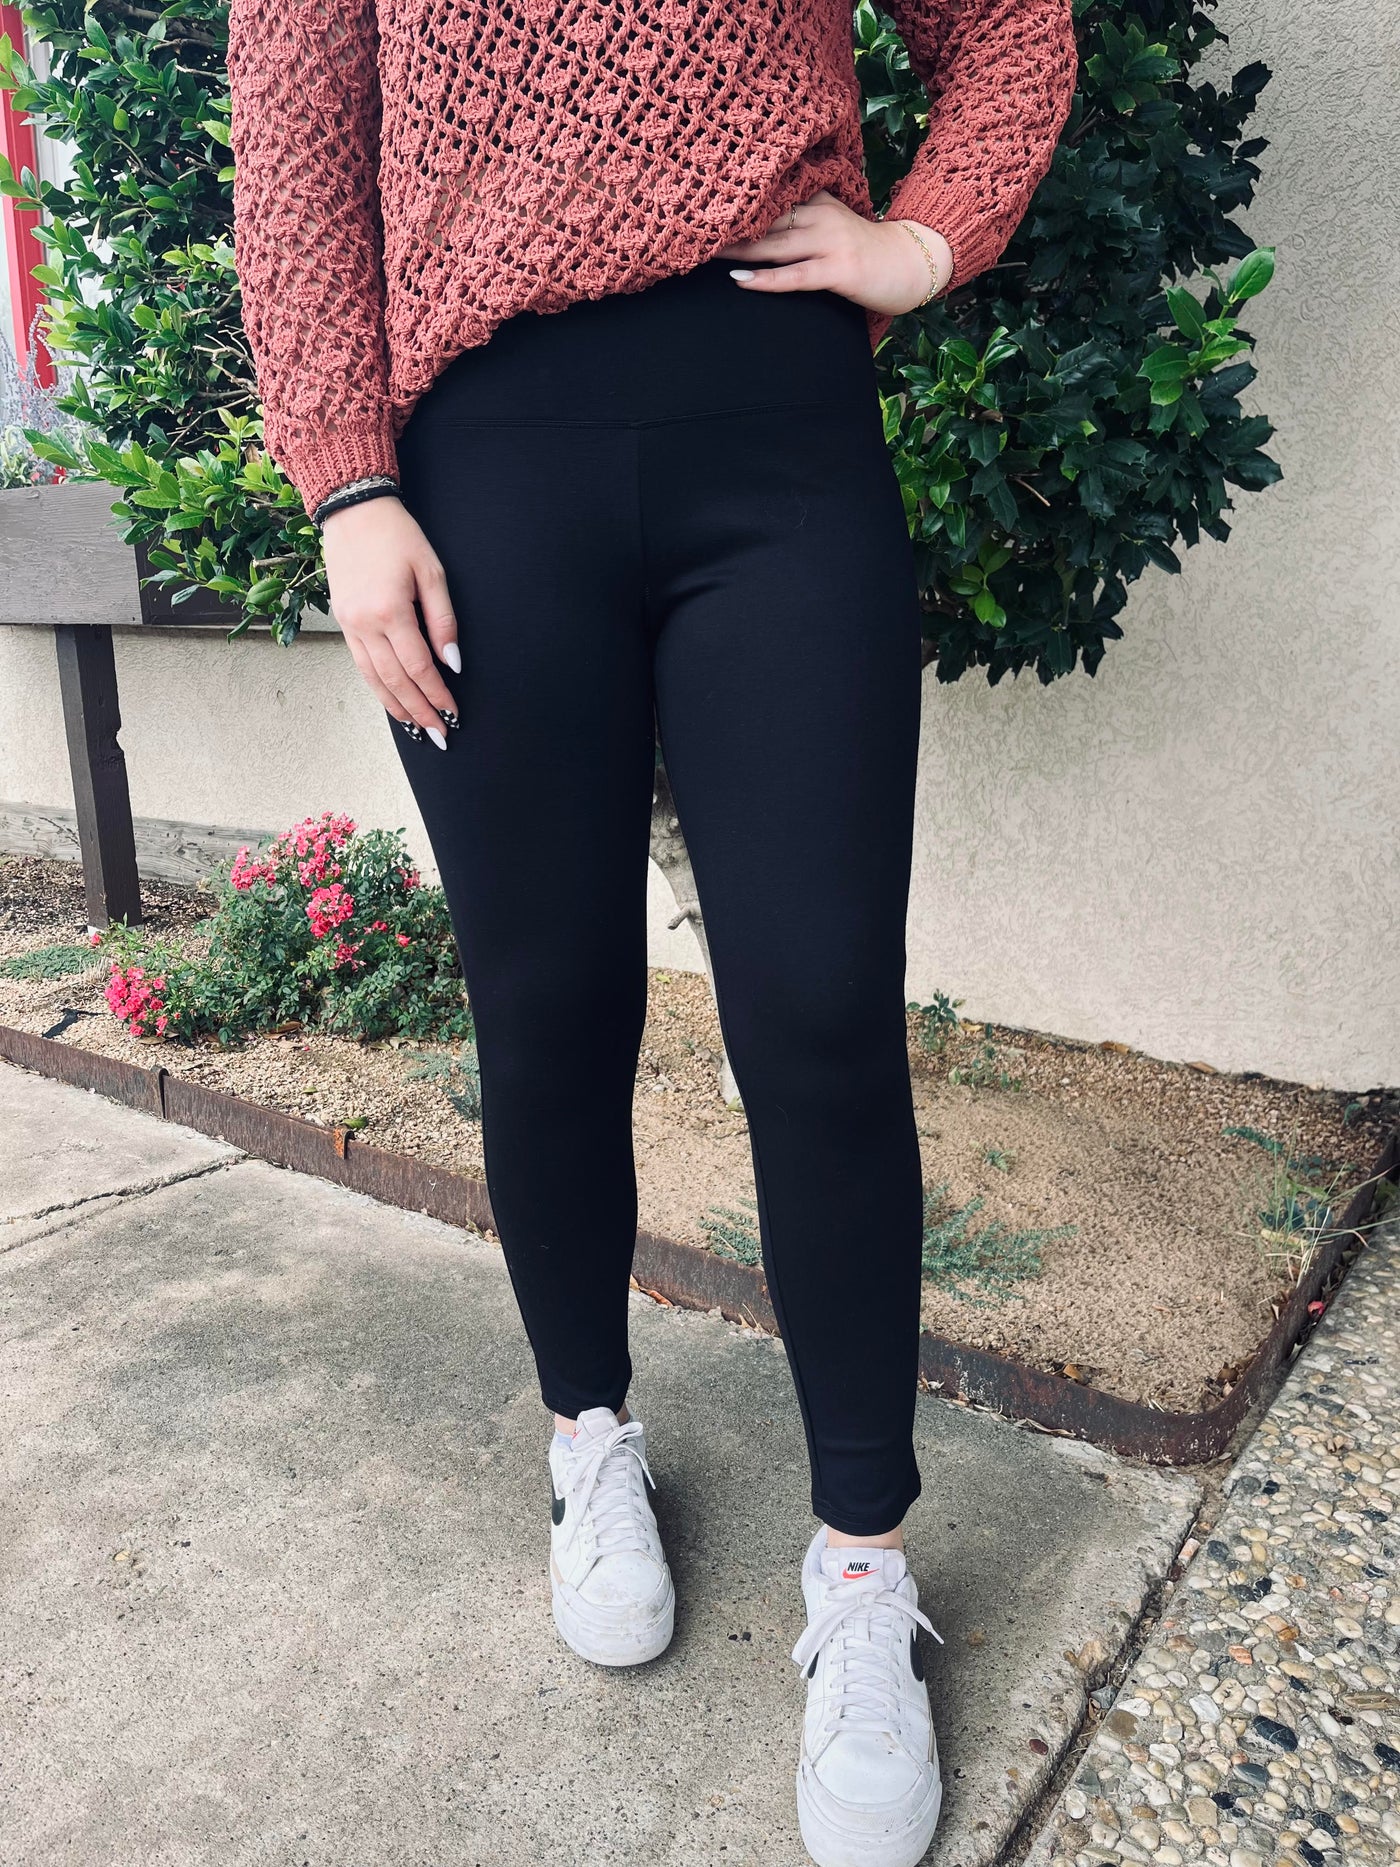 25 Casual Black Leggings Outfits For Low-Key Looks | How to wear leggings,  Outfits with leggings, Womens fashion